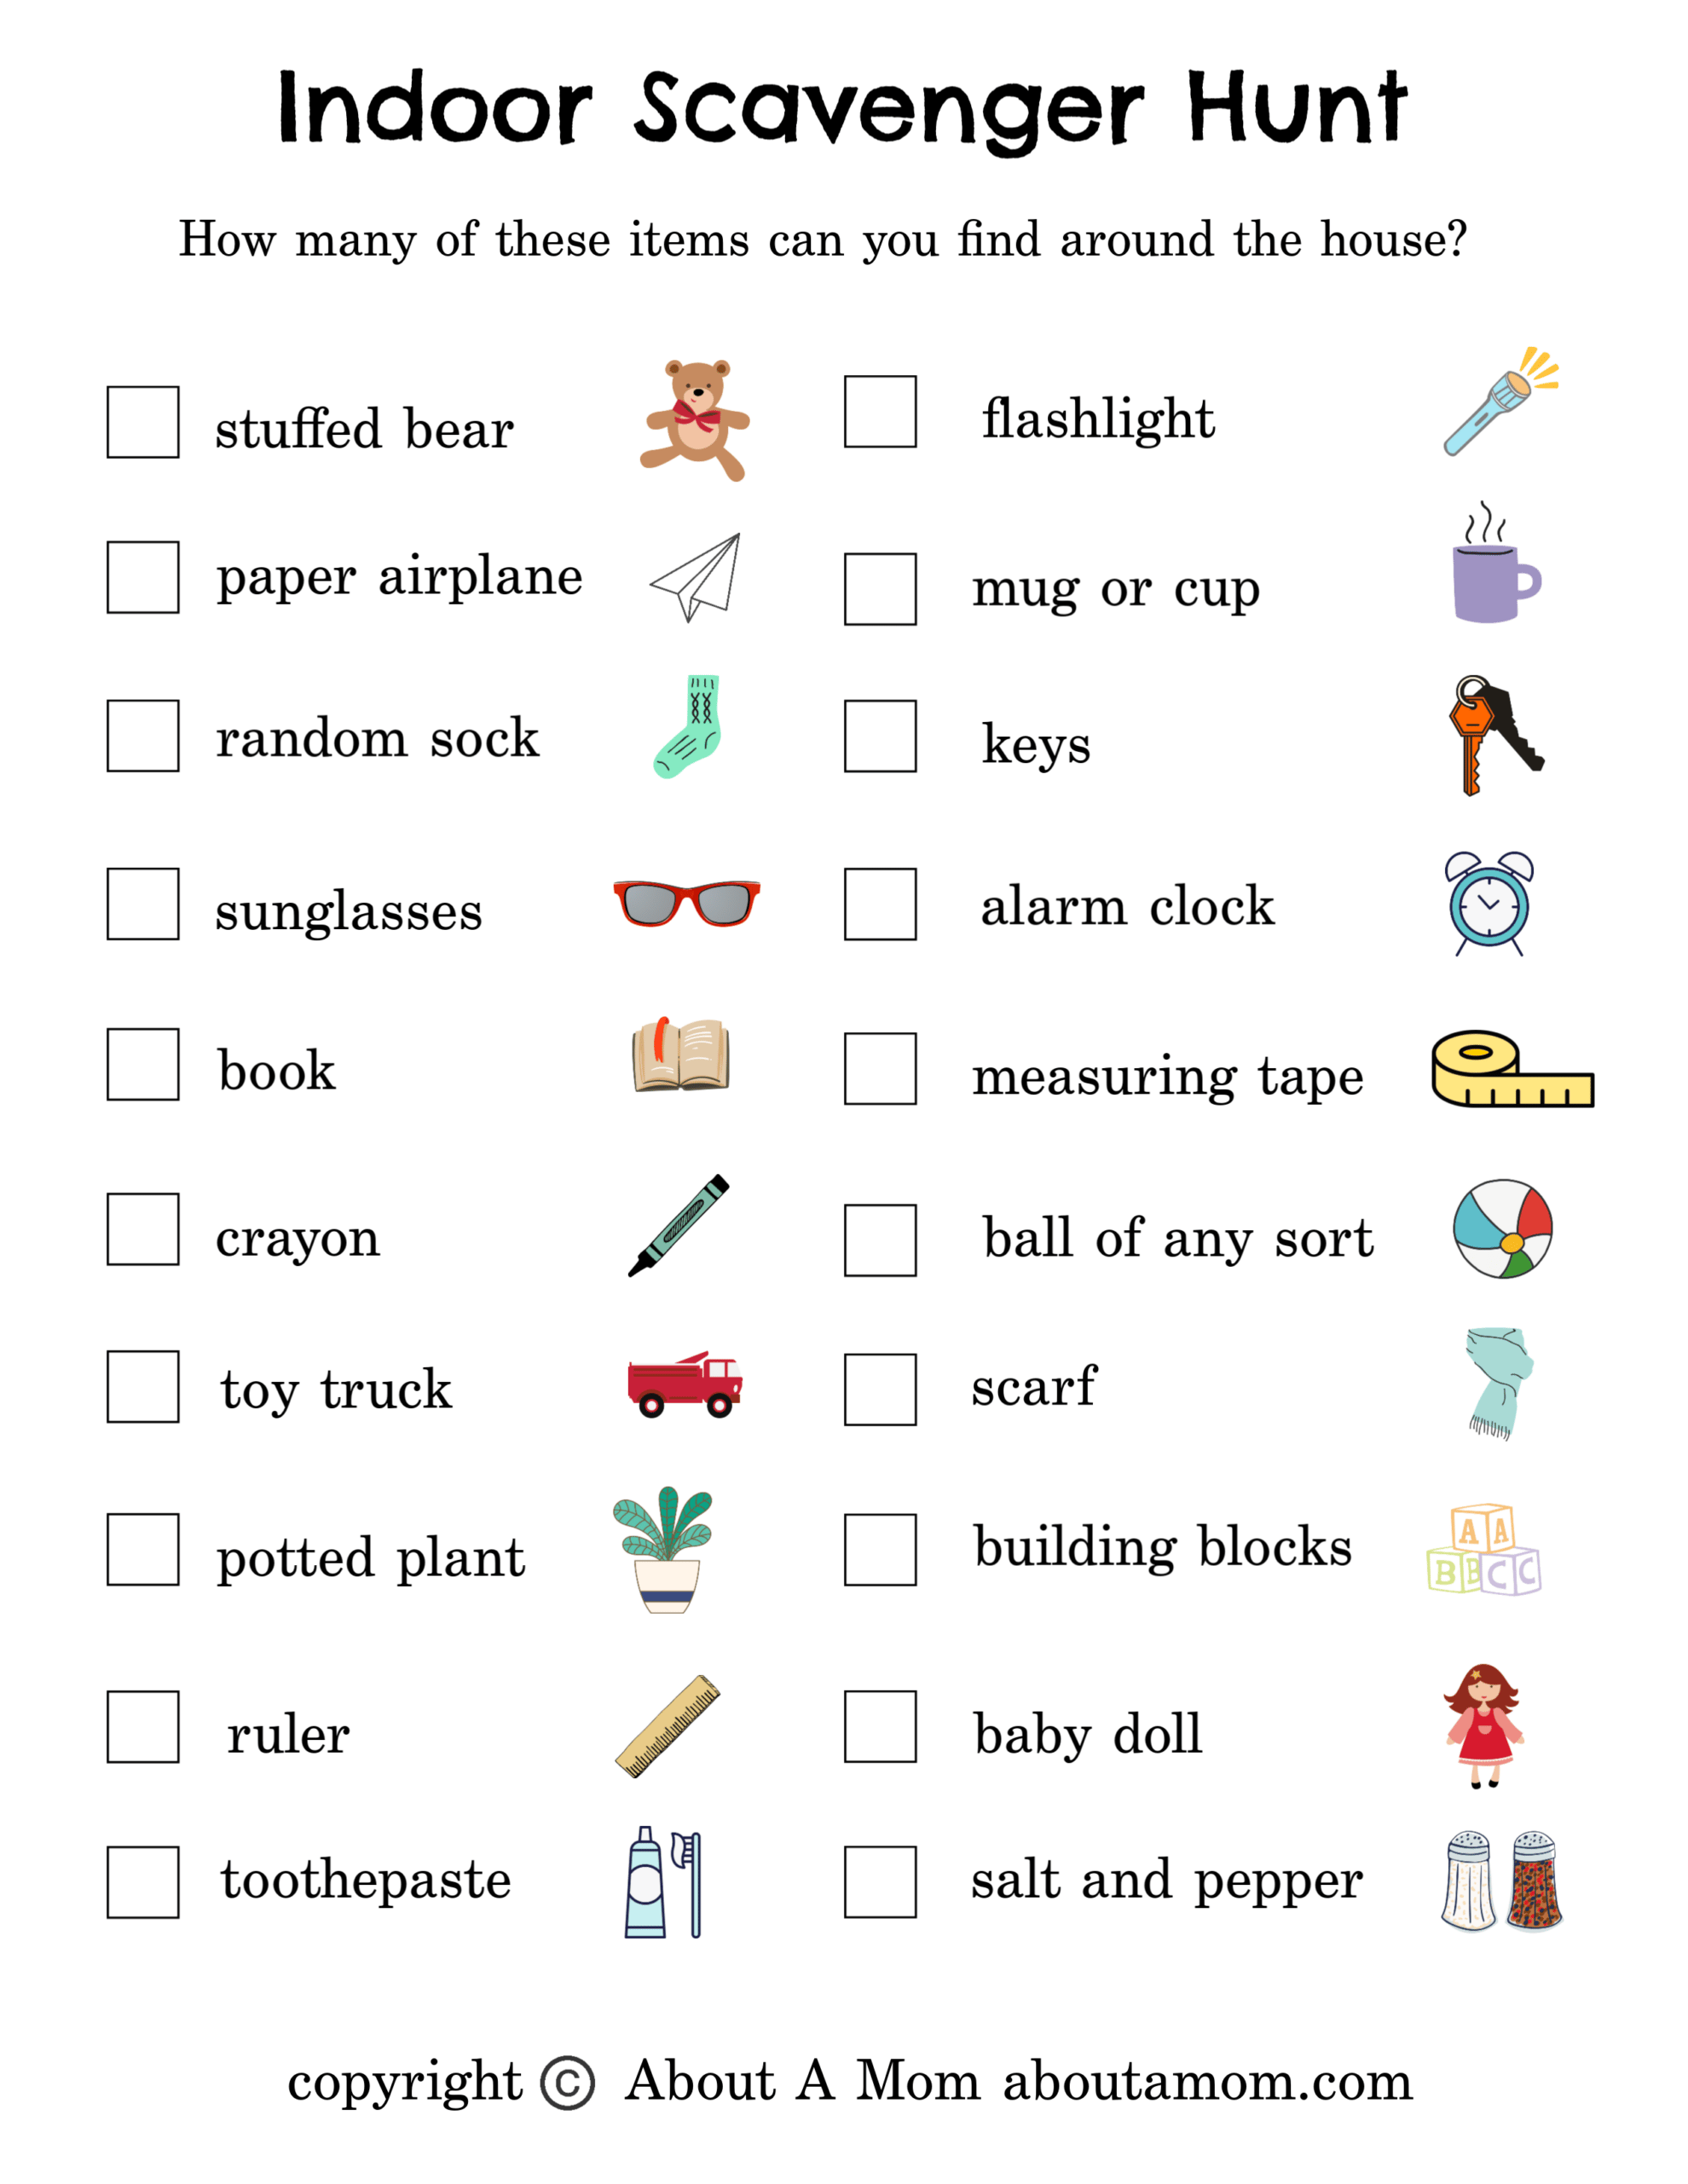 Free Indoor Scavenger Hunt Printable - About A Mom